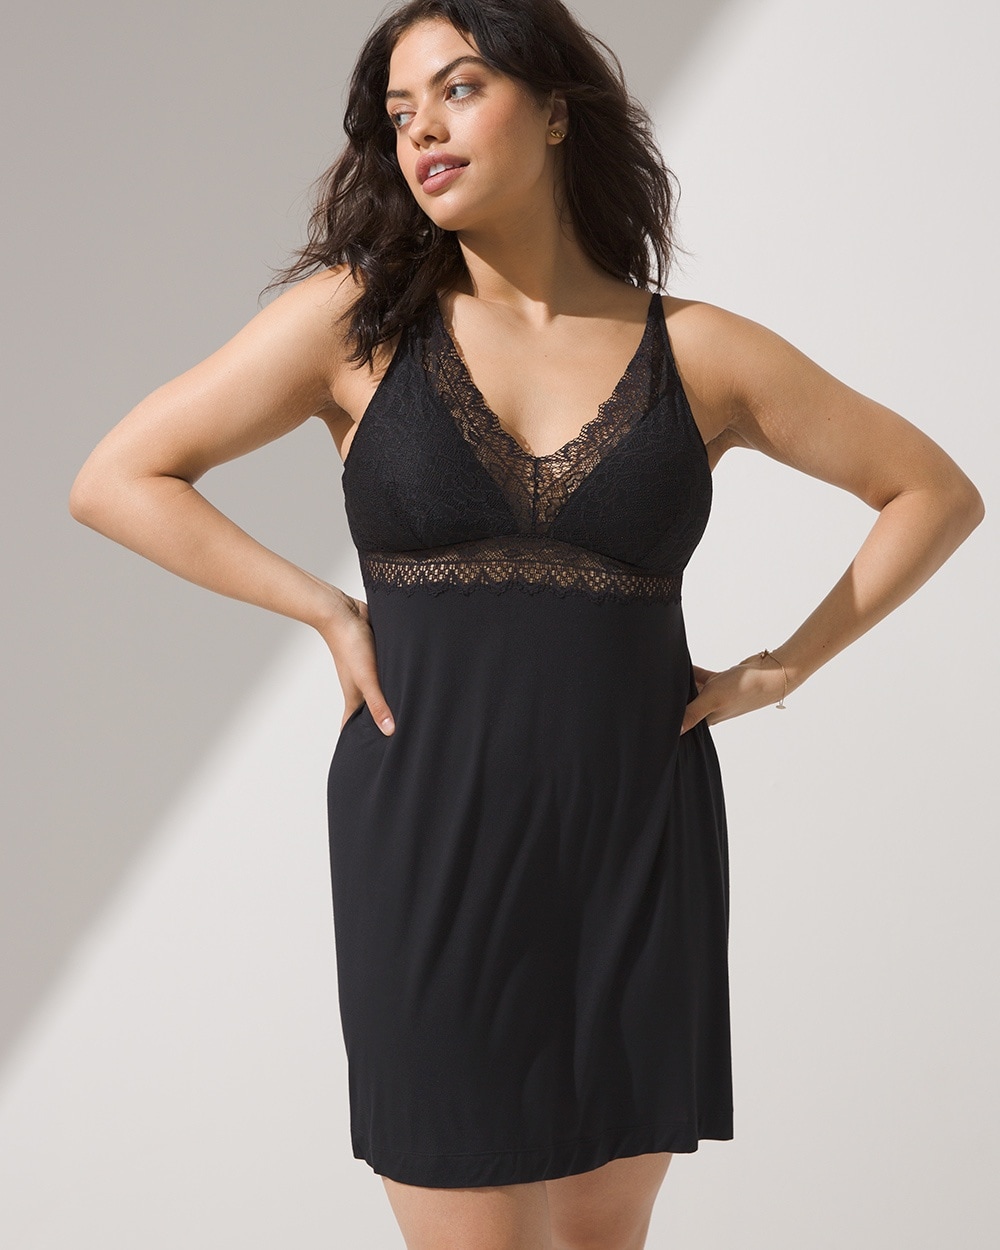 Cool Nights Lace Plunge Chemise